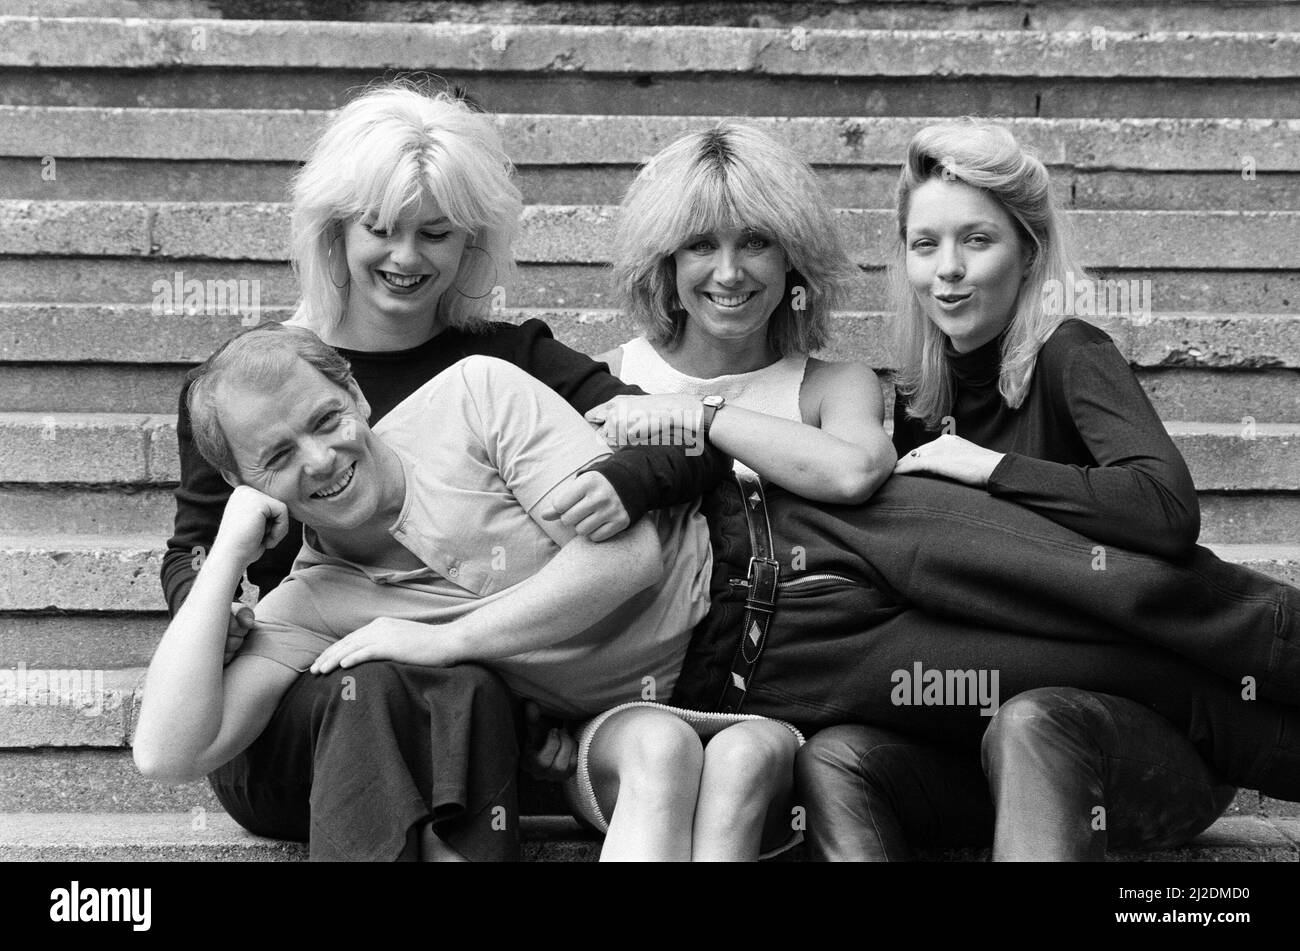 Scottish singer Jim Diamond pictured with his backing group, Vicki and Sam Brown, wife and daughter of Joe Brown and Sonia Jones. Backing singers from left to right, Sam Brown, Vicki Brown and Sonia Jones. 16th May 1985. Stock Photo